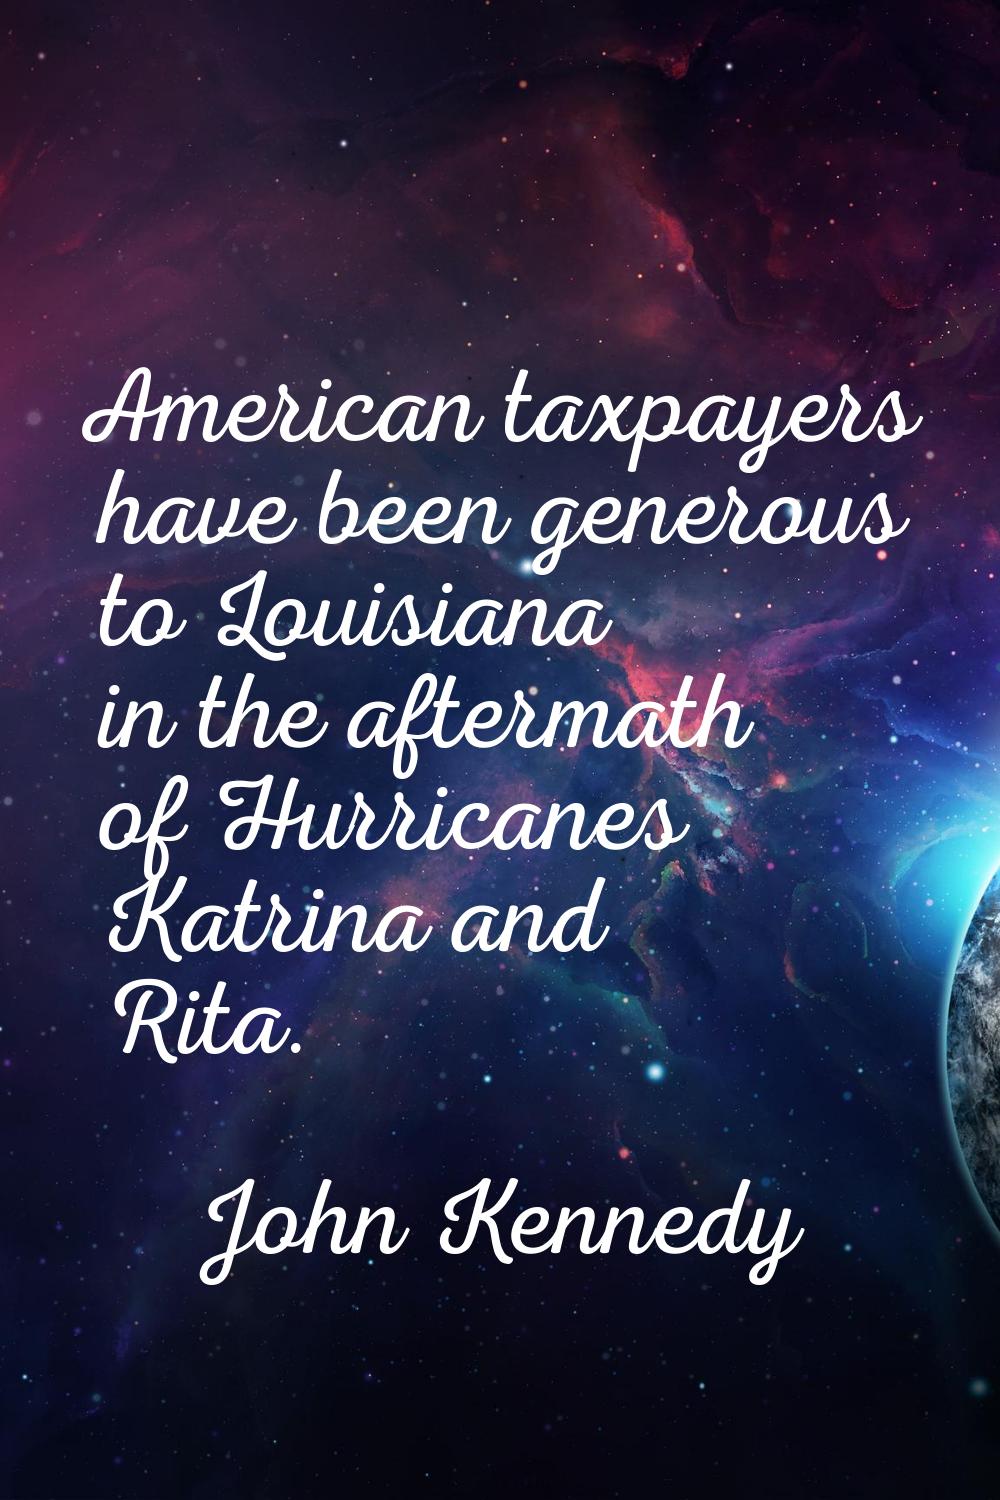 American taxpayers have been generous to Louisiana in the aftermath of Hurricanes Katrina and Rita.